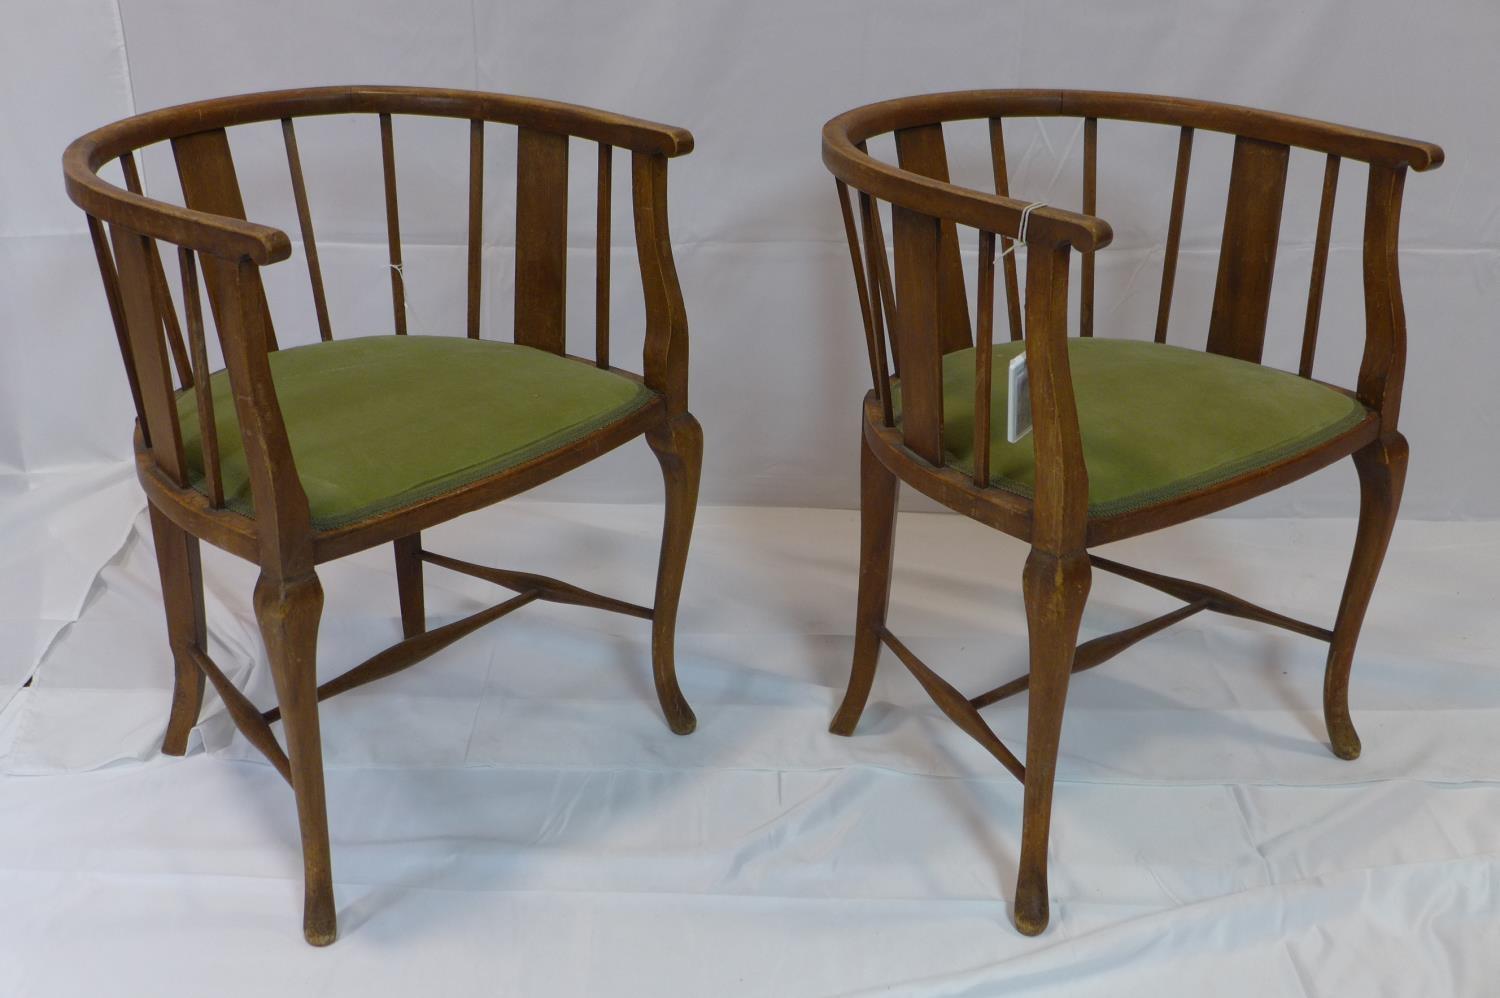 A pair of Edwardian mahogany tub chairs with velour seats - Image 2 of 4